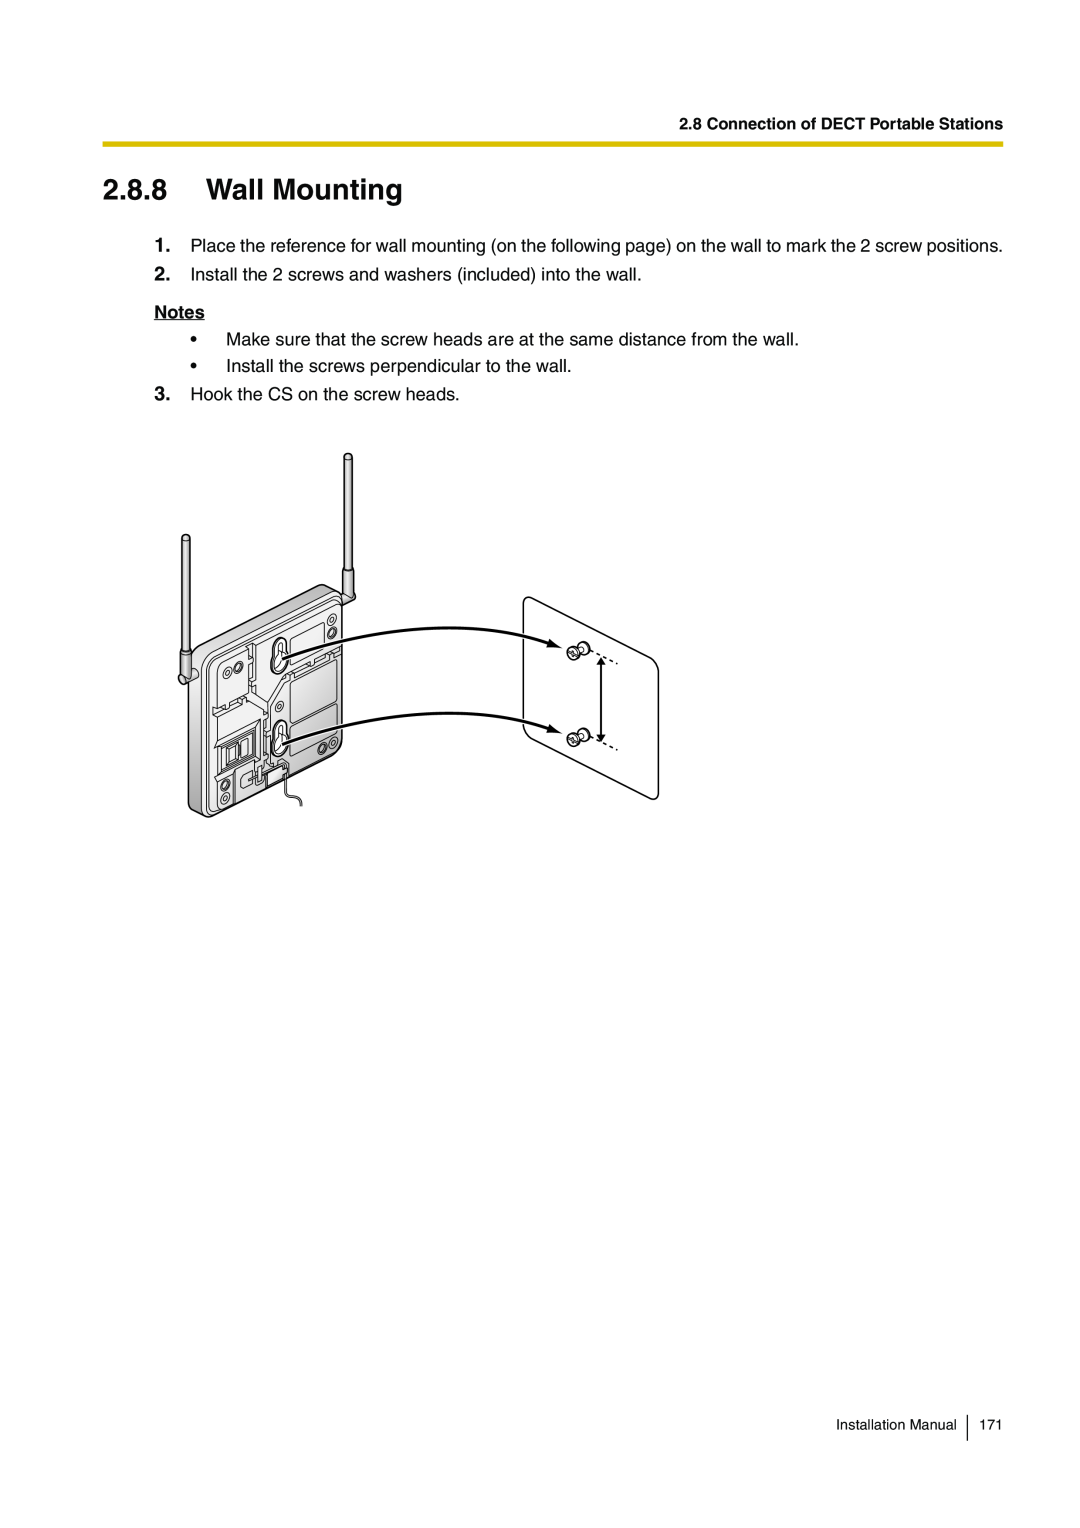 Panasonic KX-TDA100 Wall Mounting, Install the 2 screws and washers included into the wall, Hook the CS on the screw heads 